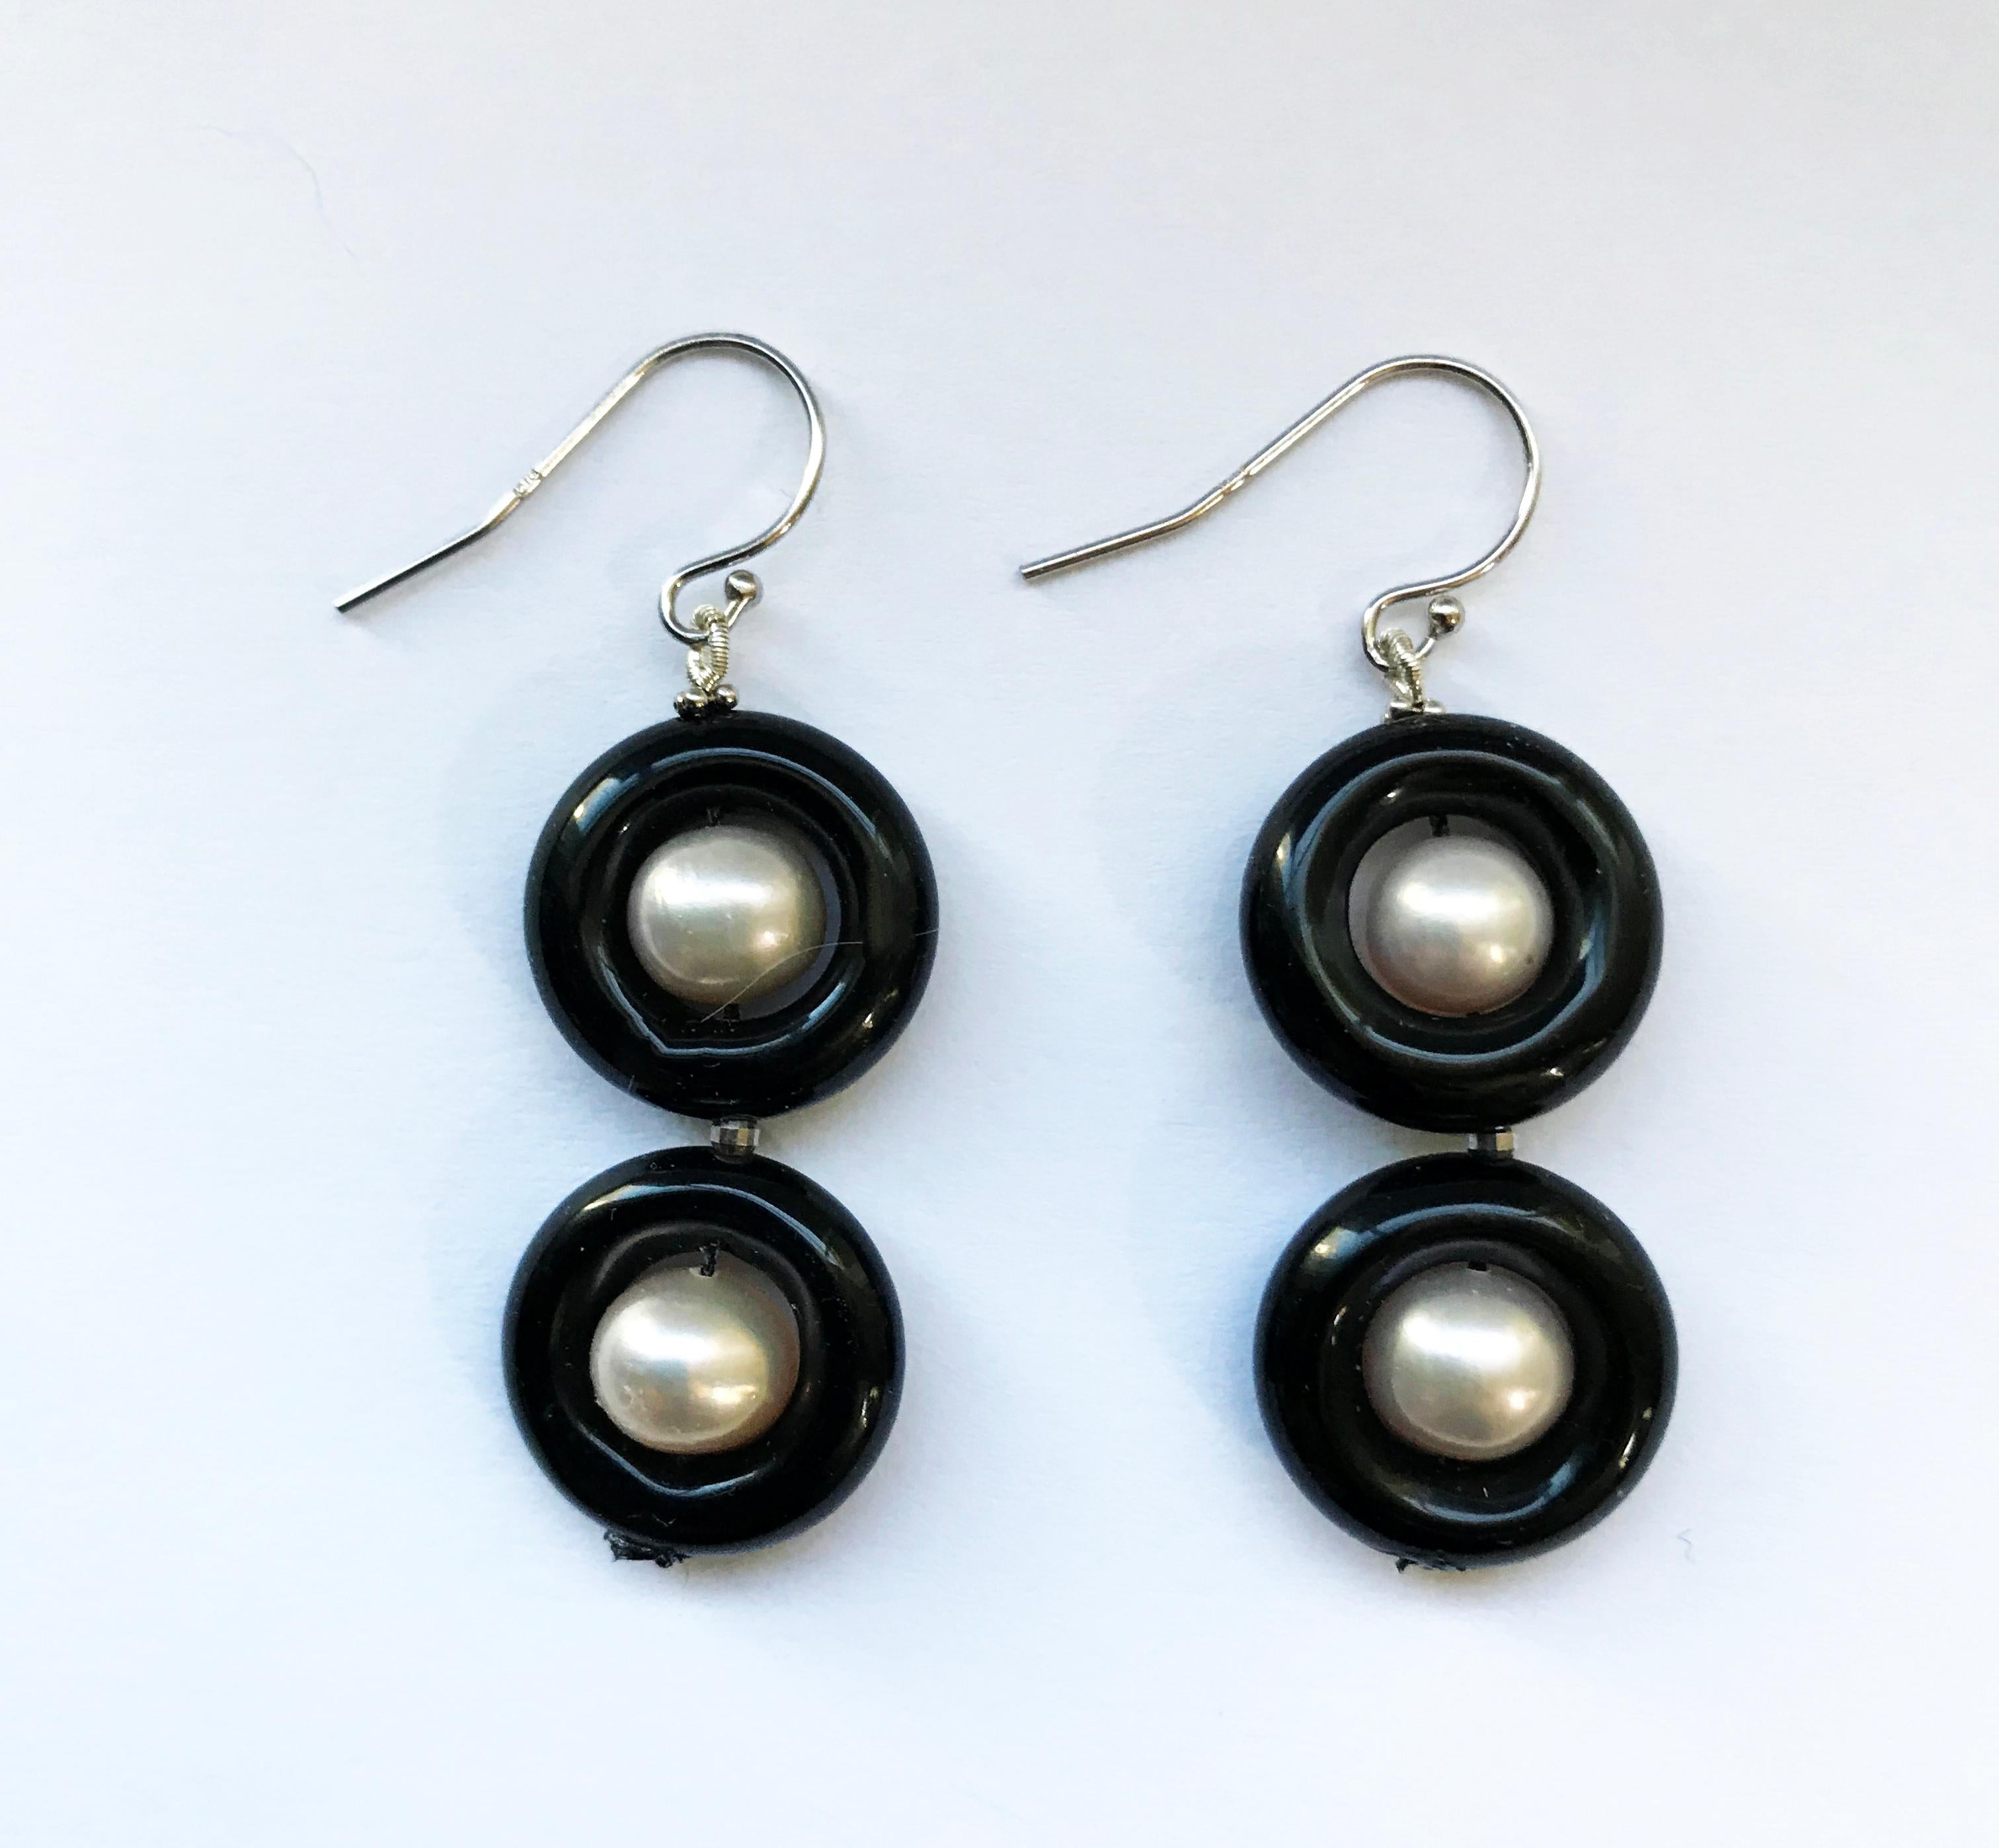 These classic double black onyx and pearl earrings with 14 k white gold hook and wiring are elegant and bold. The onyx rings contrast with the glowing white pearls beautifully making, what could have been simple earrings dramatic and eye-catching.